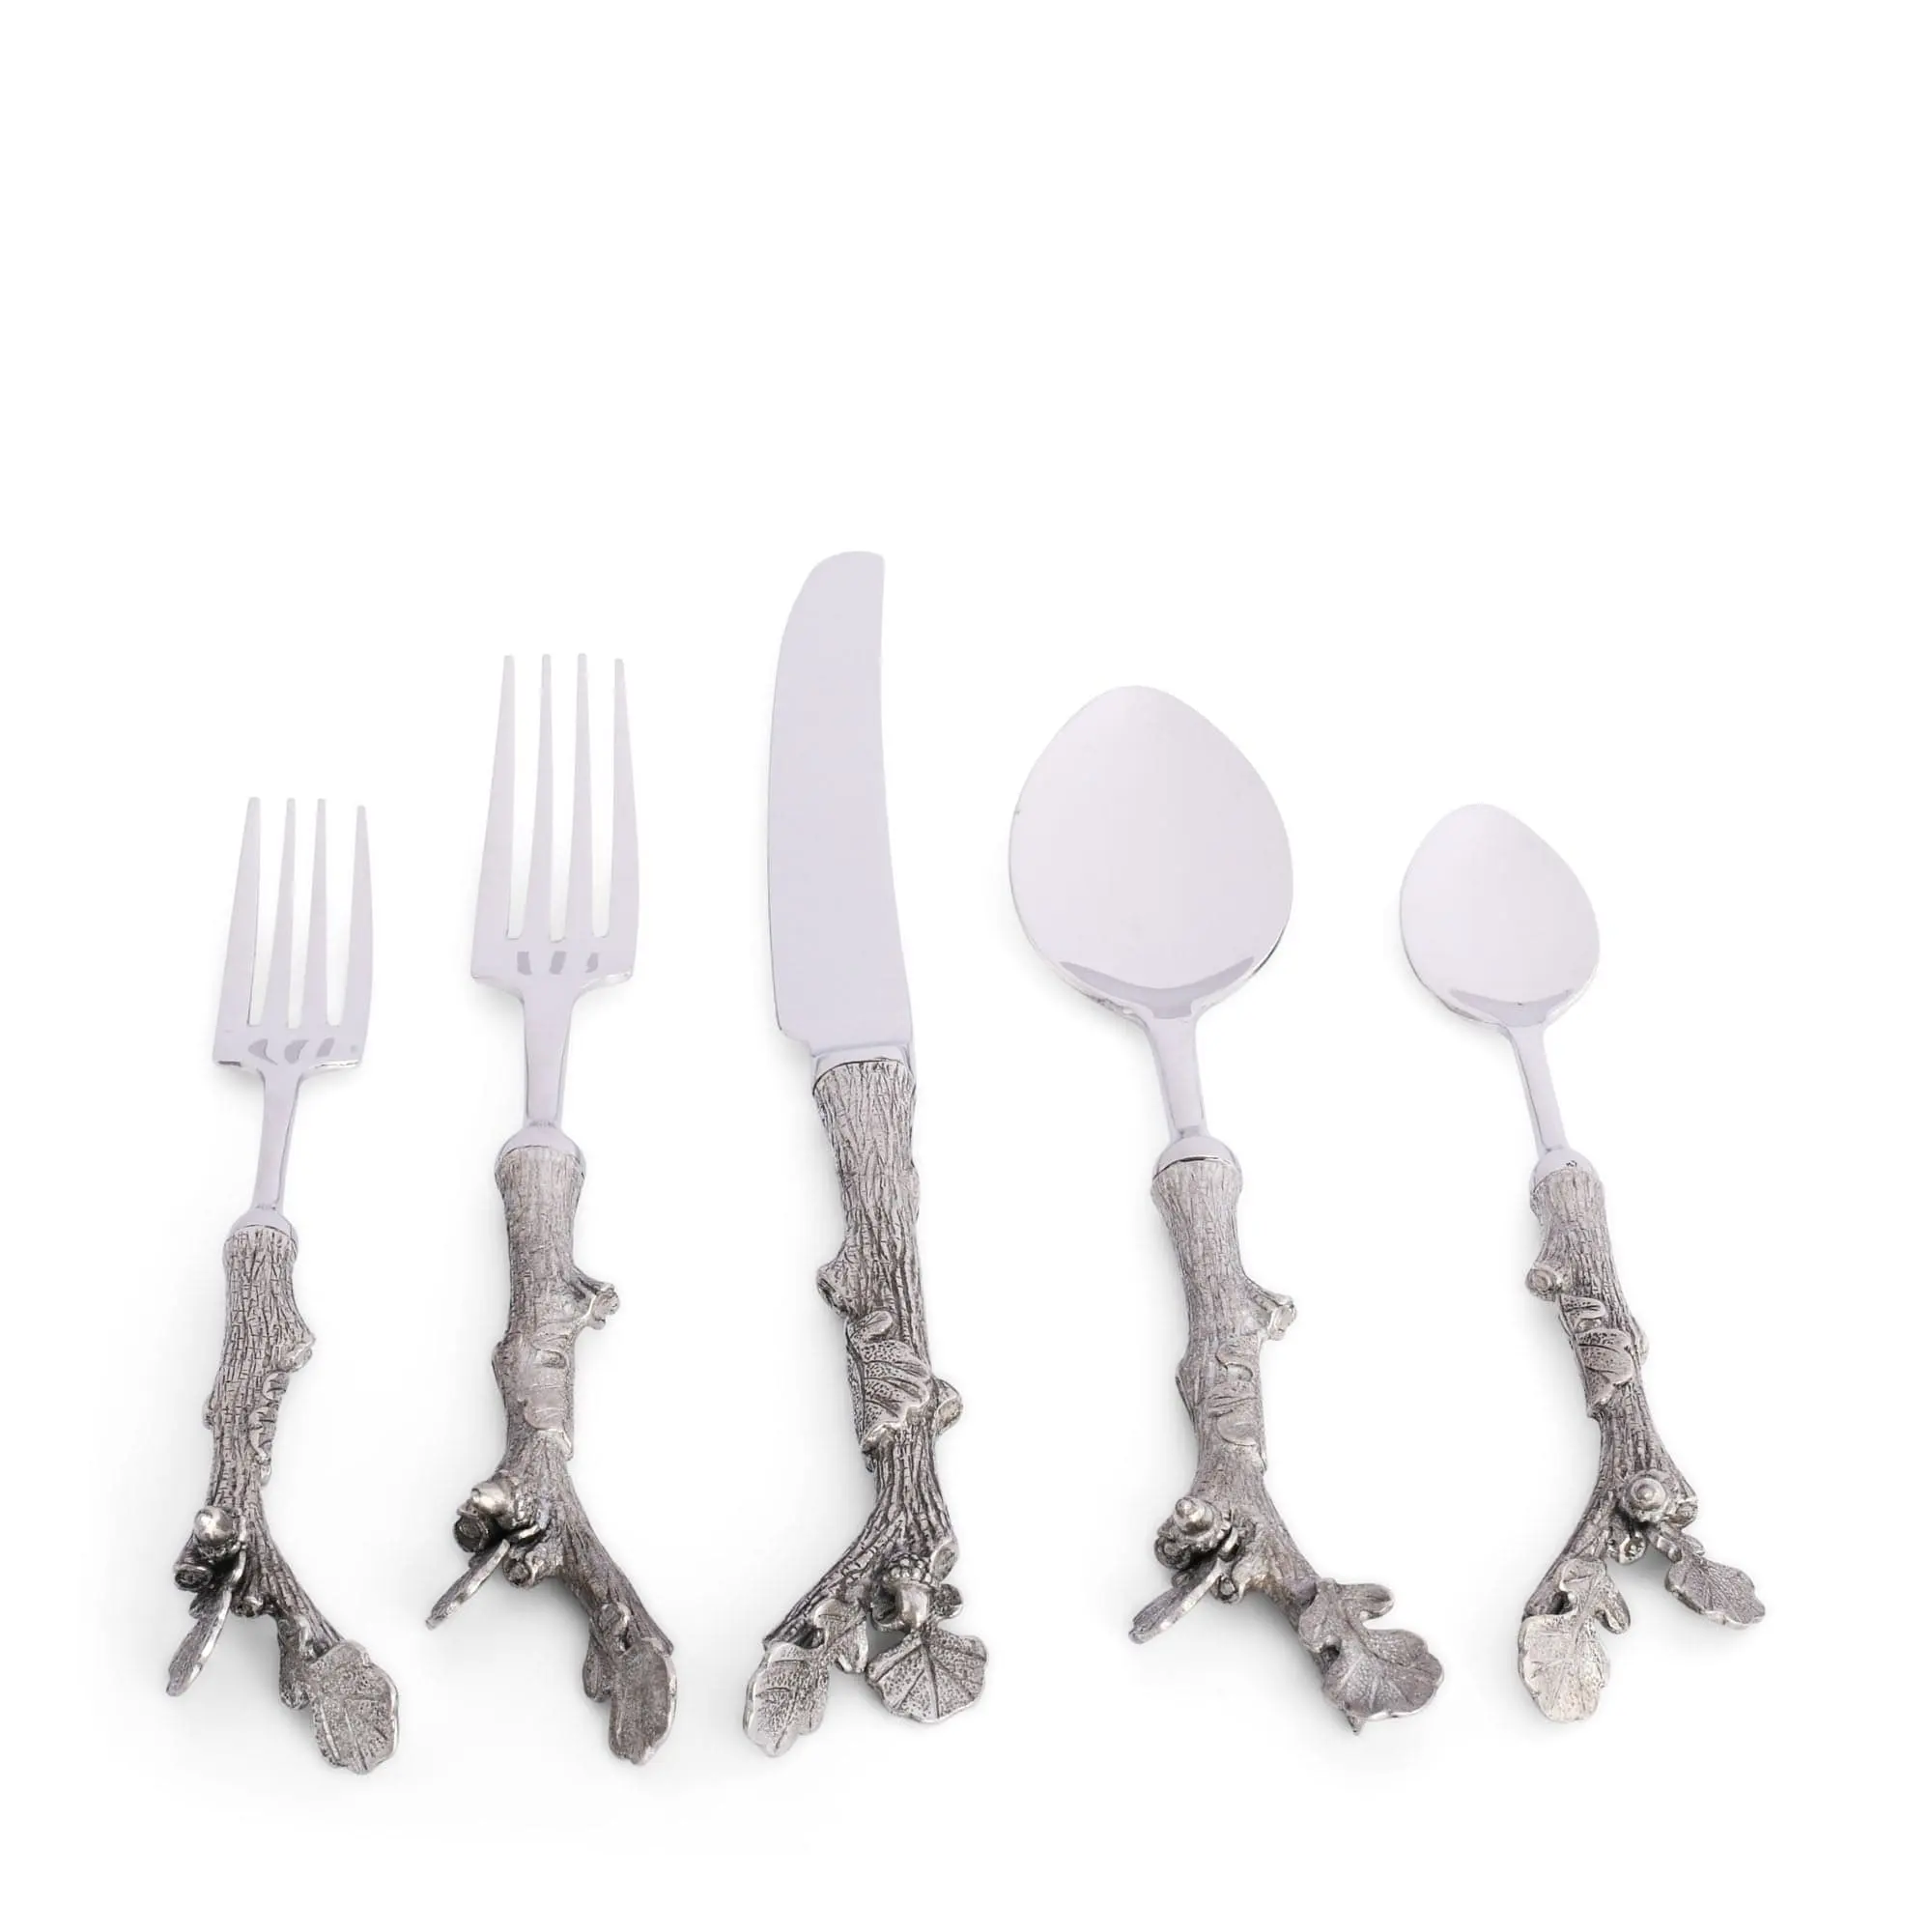 Branch Detailing Handle Flatware Cutlery Set Perfect For Using It Every Day Enjoy Exciting Dining Adventure Each & Every Night